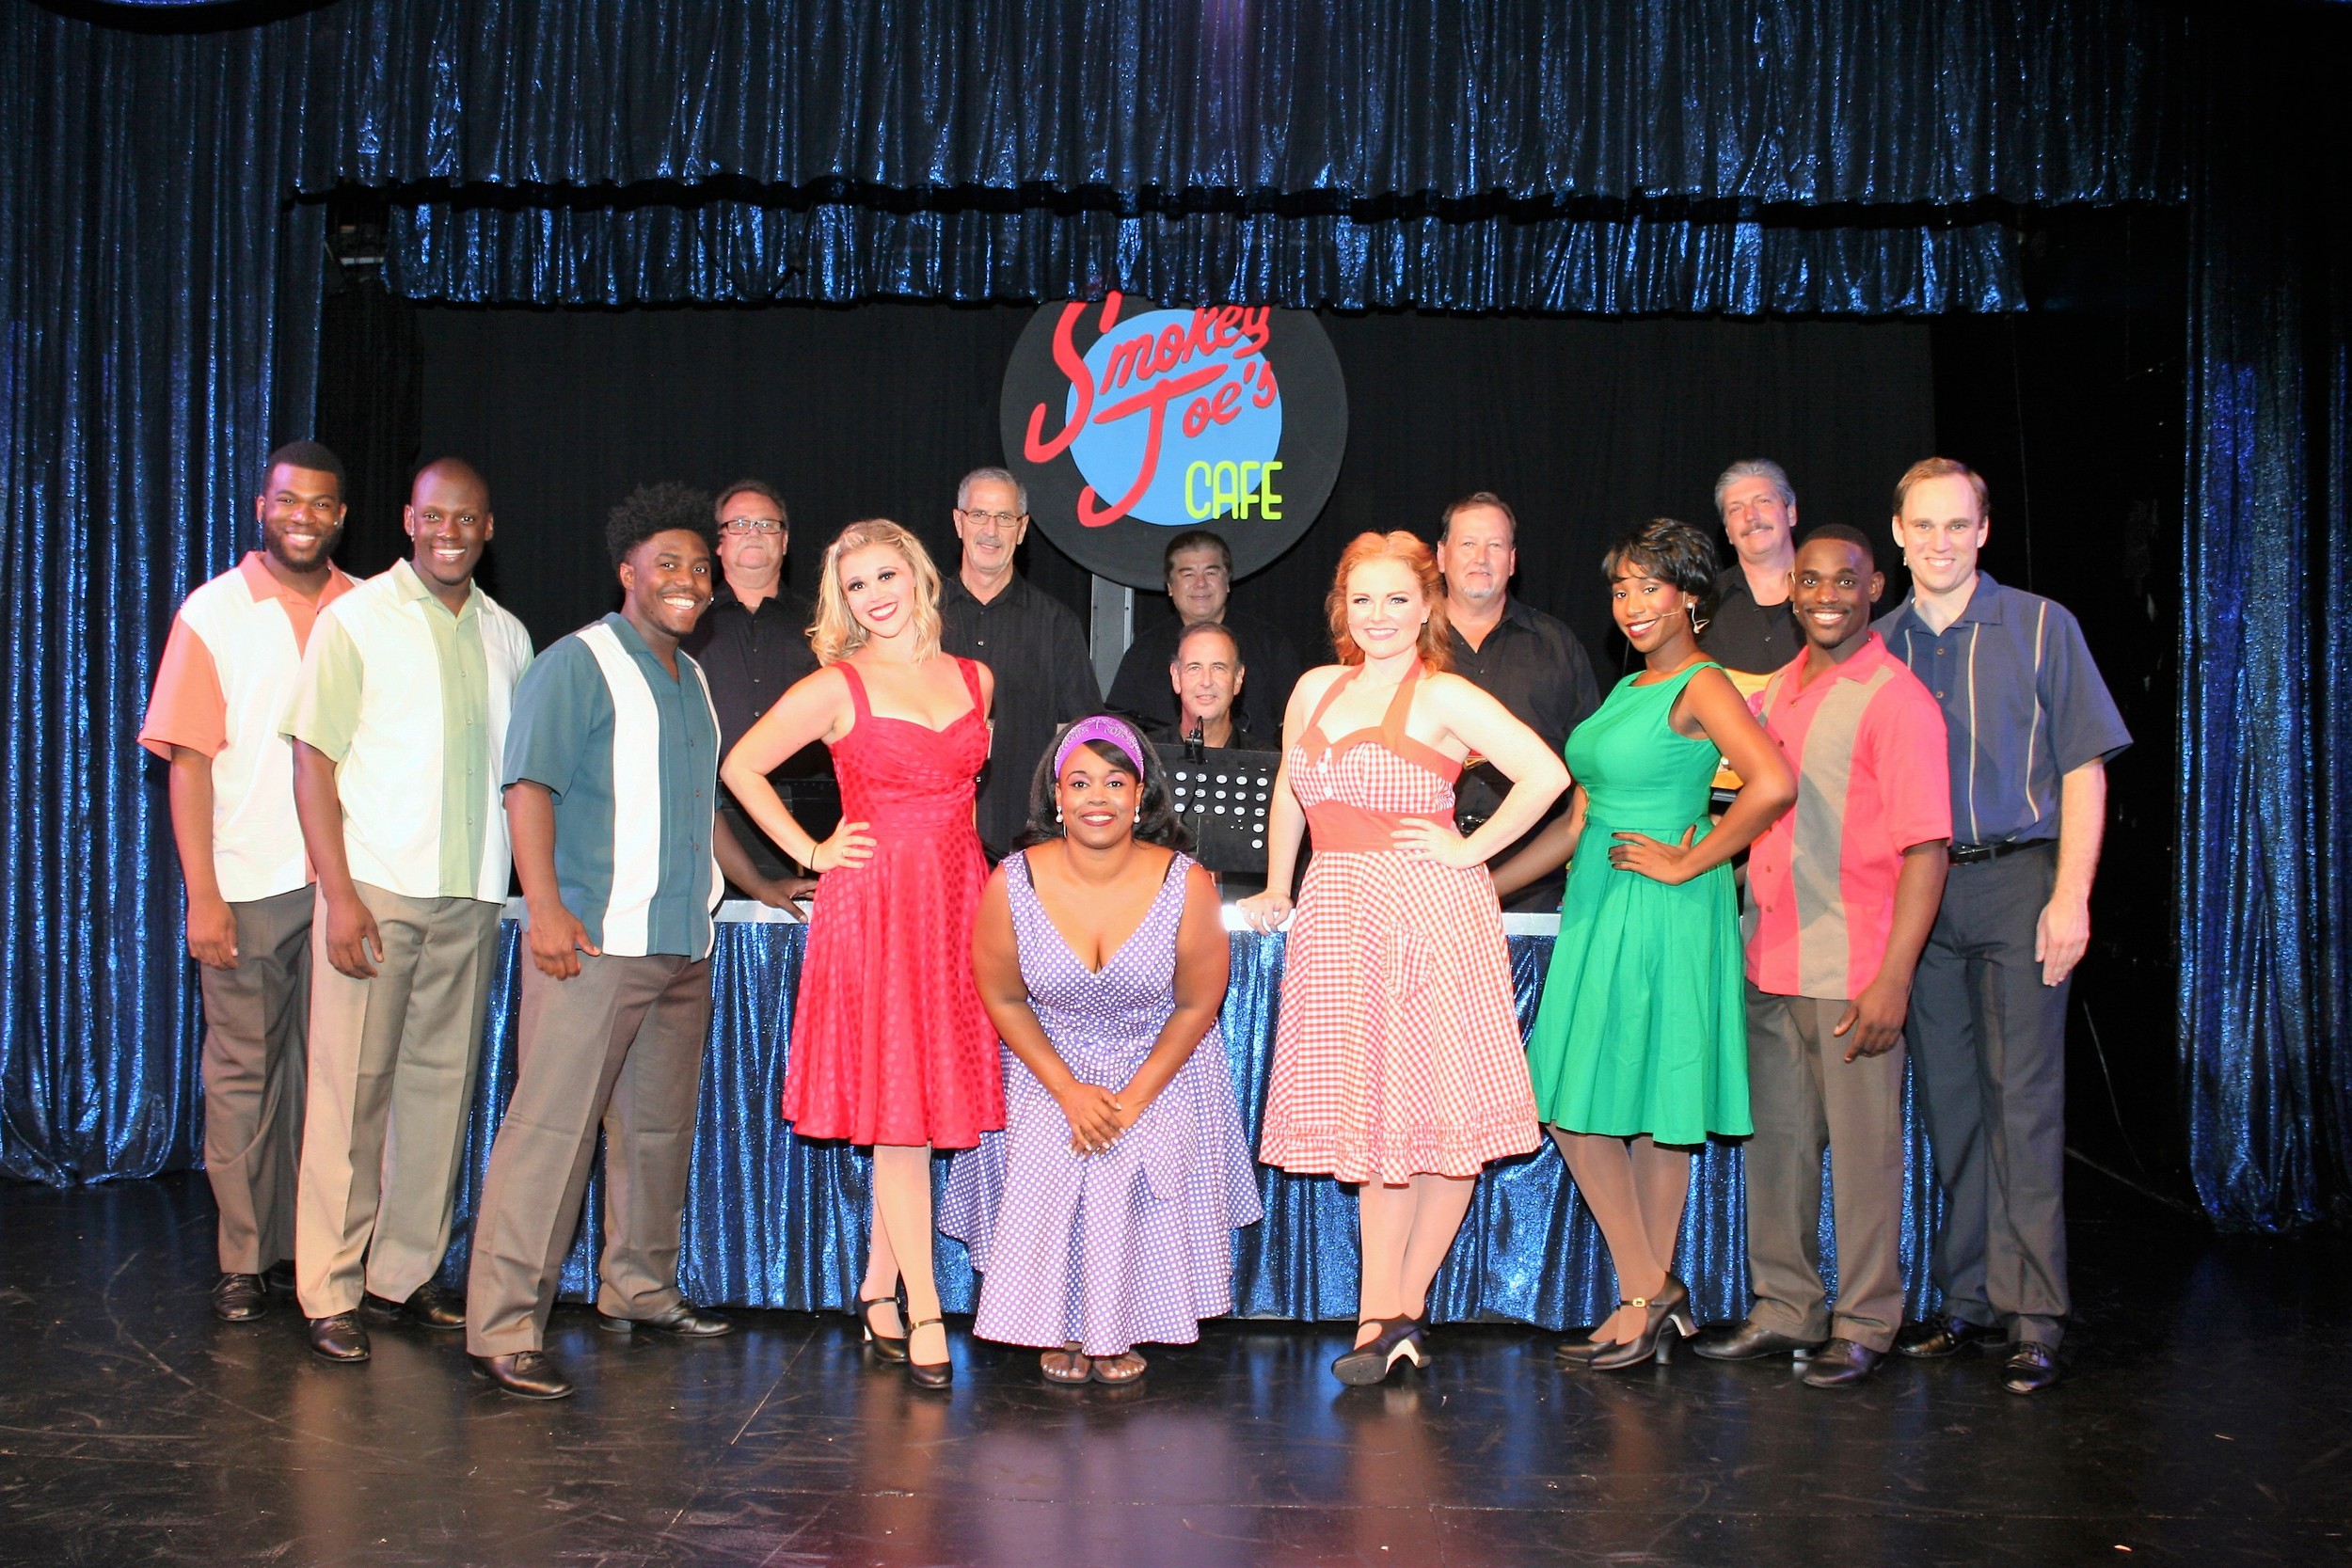 The cast of Smokey Joe’s Café brings to life the popular songs of Leiber and Stoller.